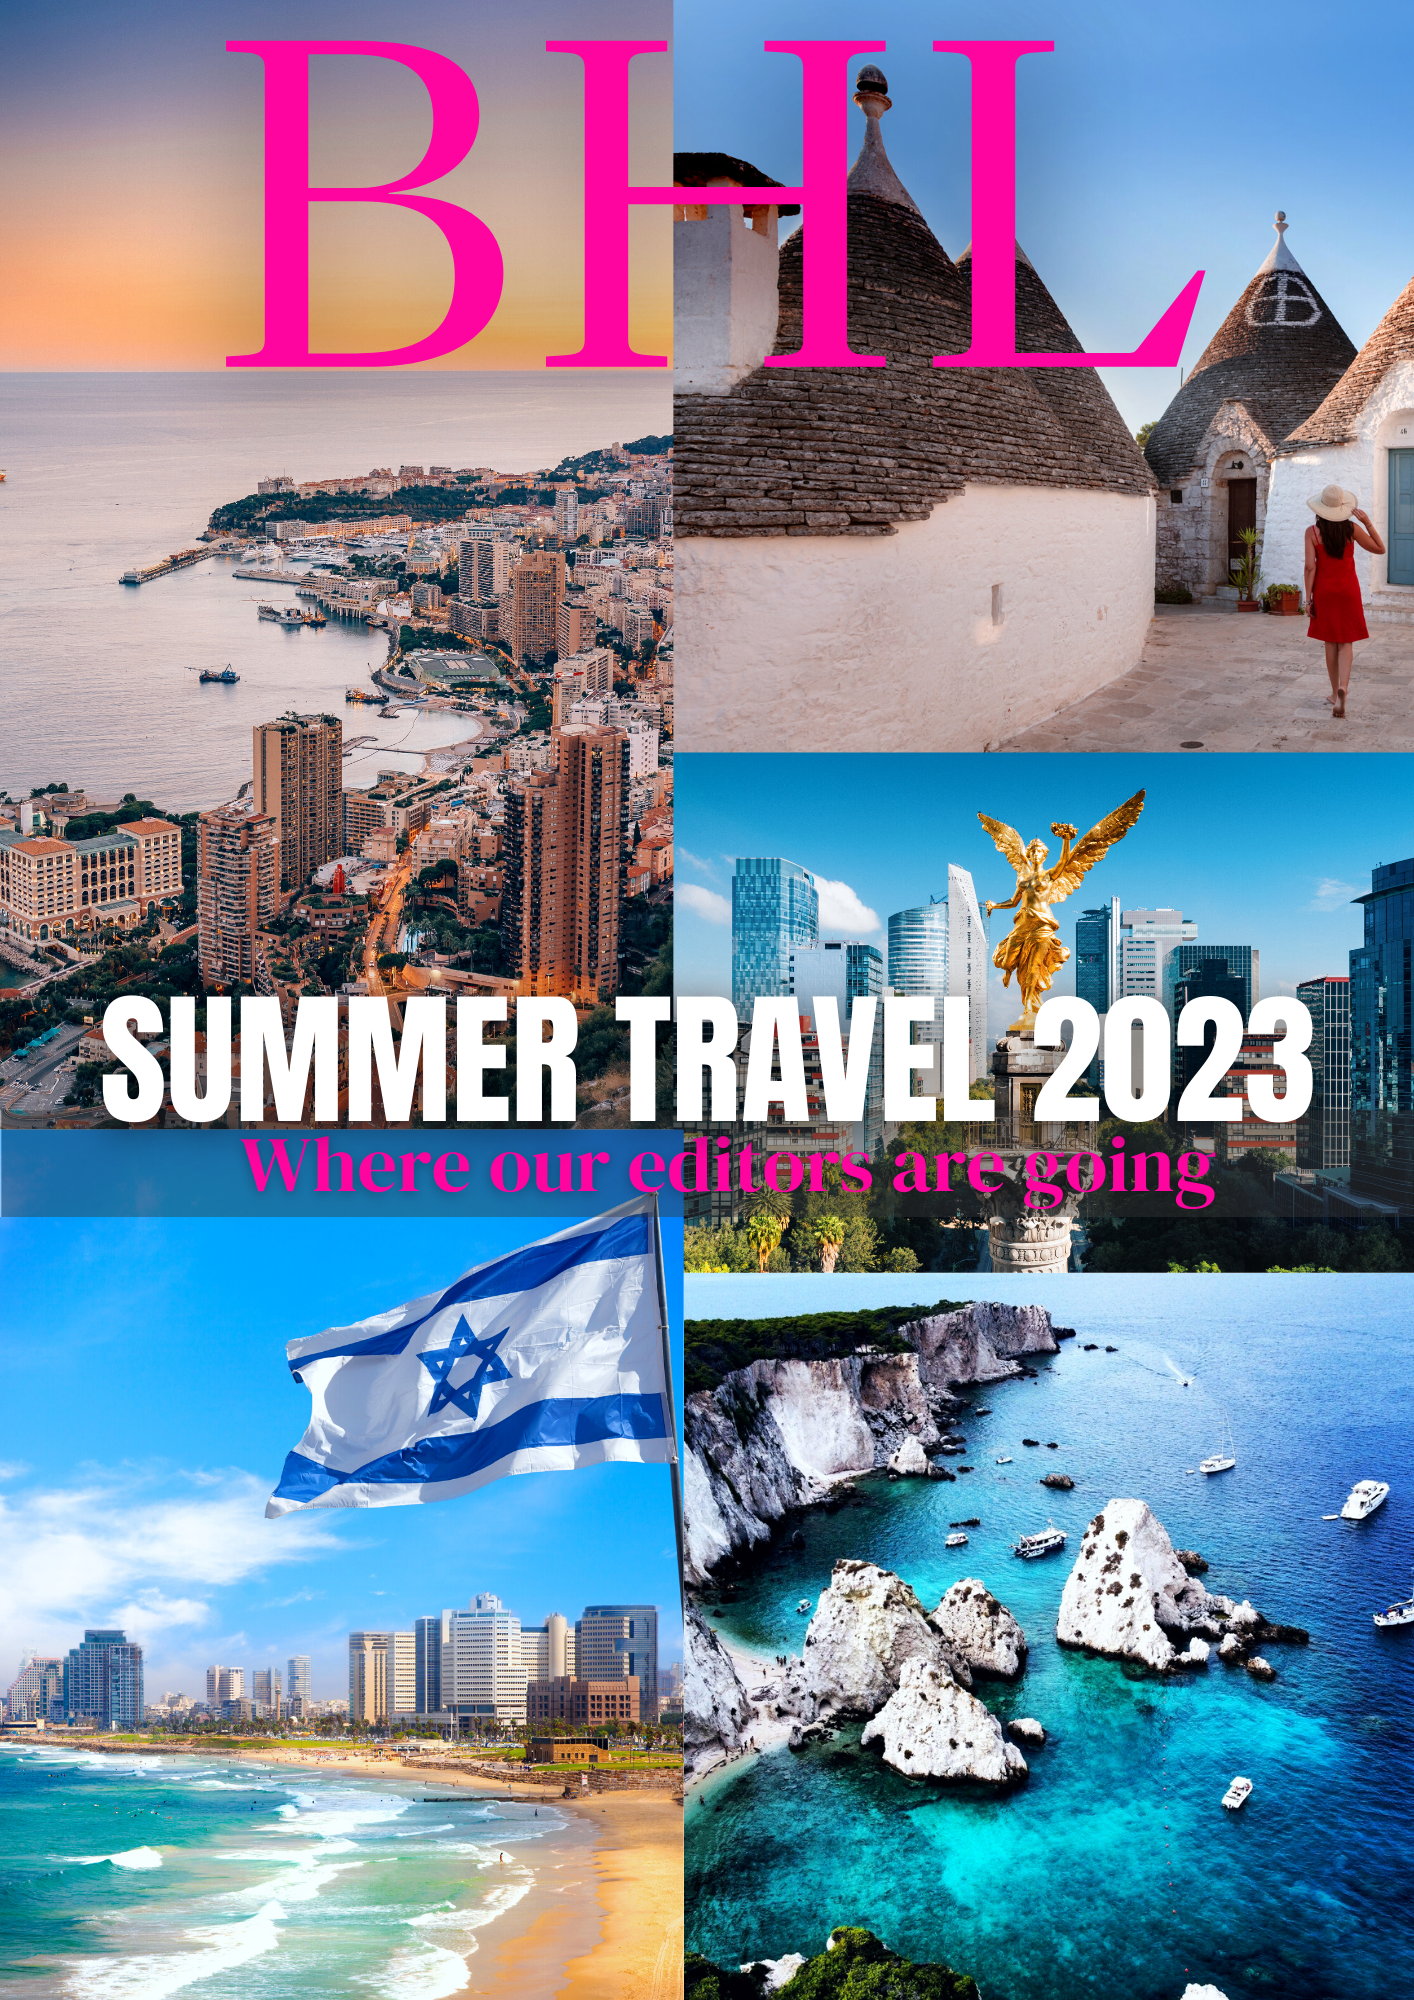 SUMMER TRAVEL 2023: WHERE ARE OUR EDITORS GOING?